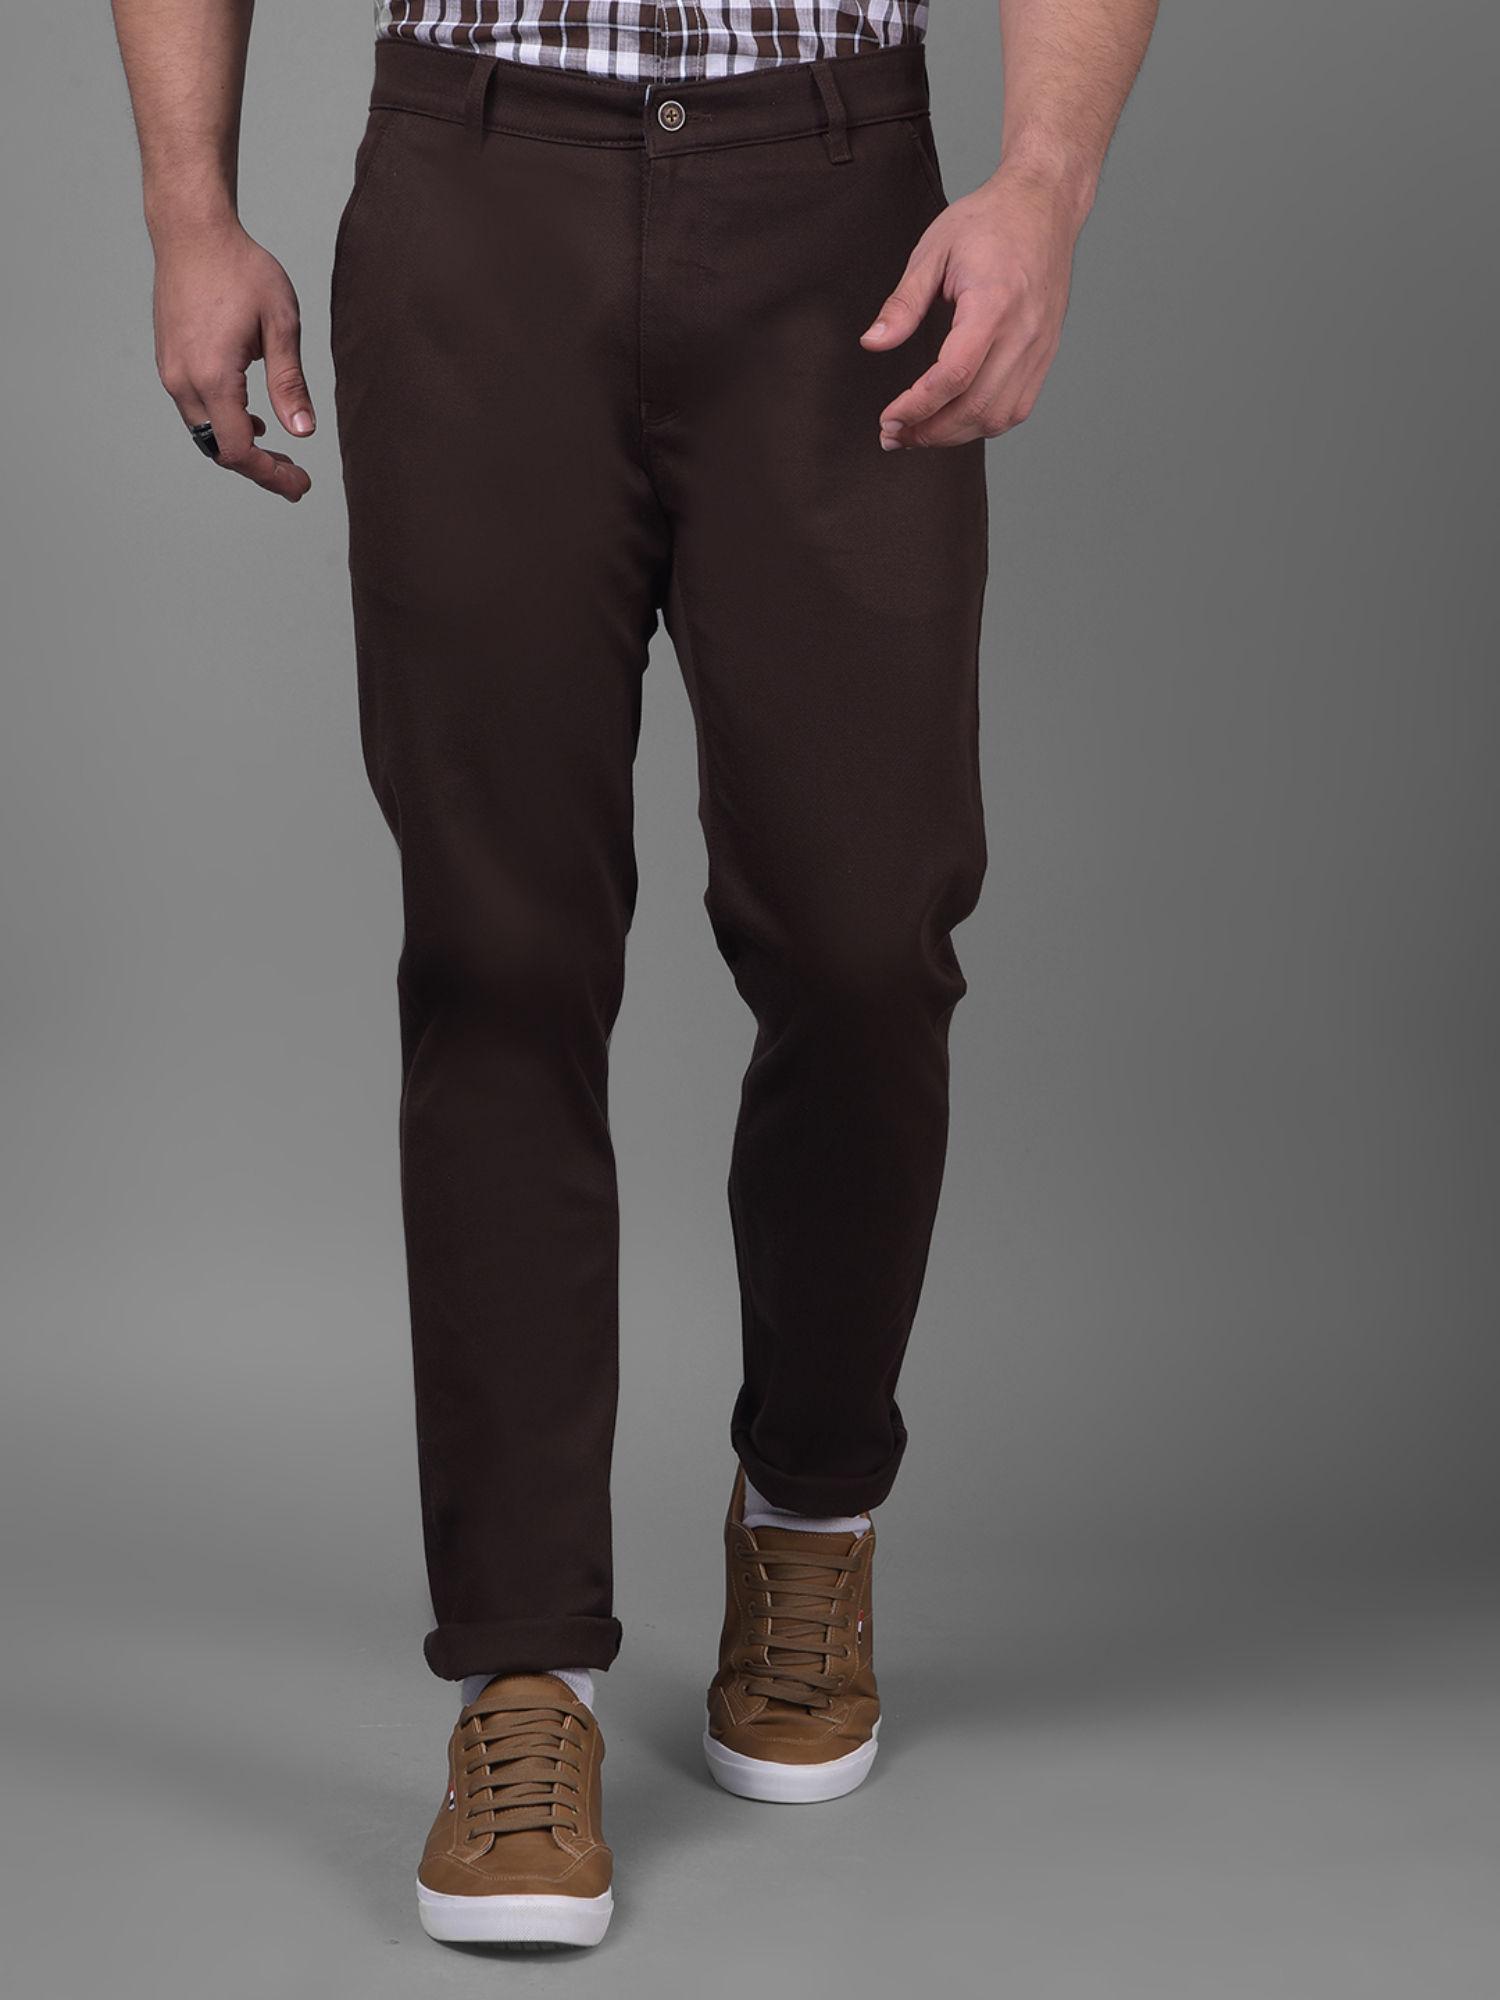 mens solid brown chinos trousers